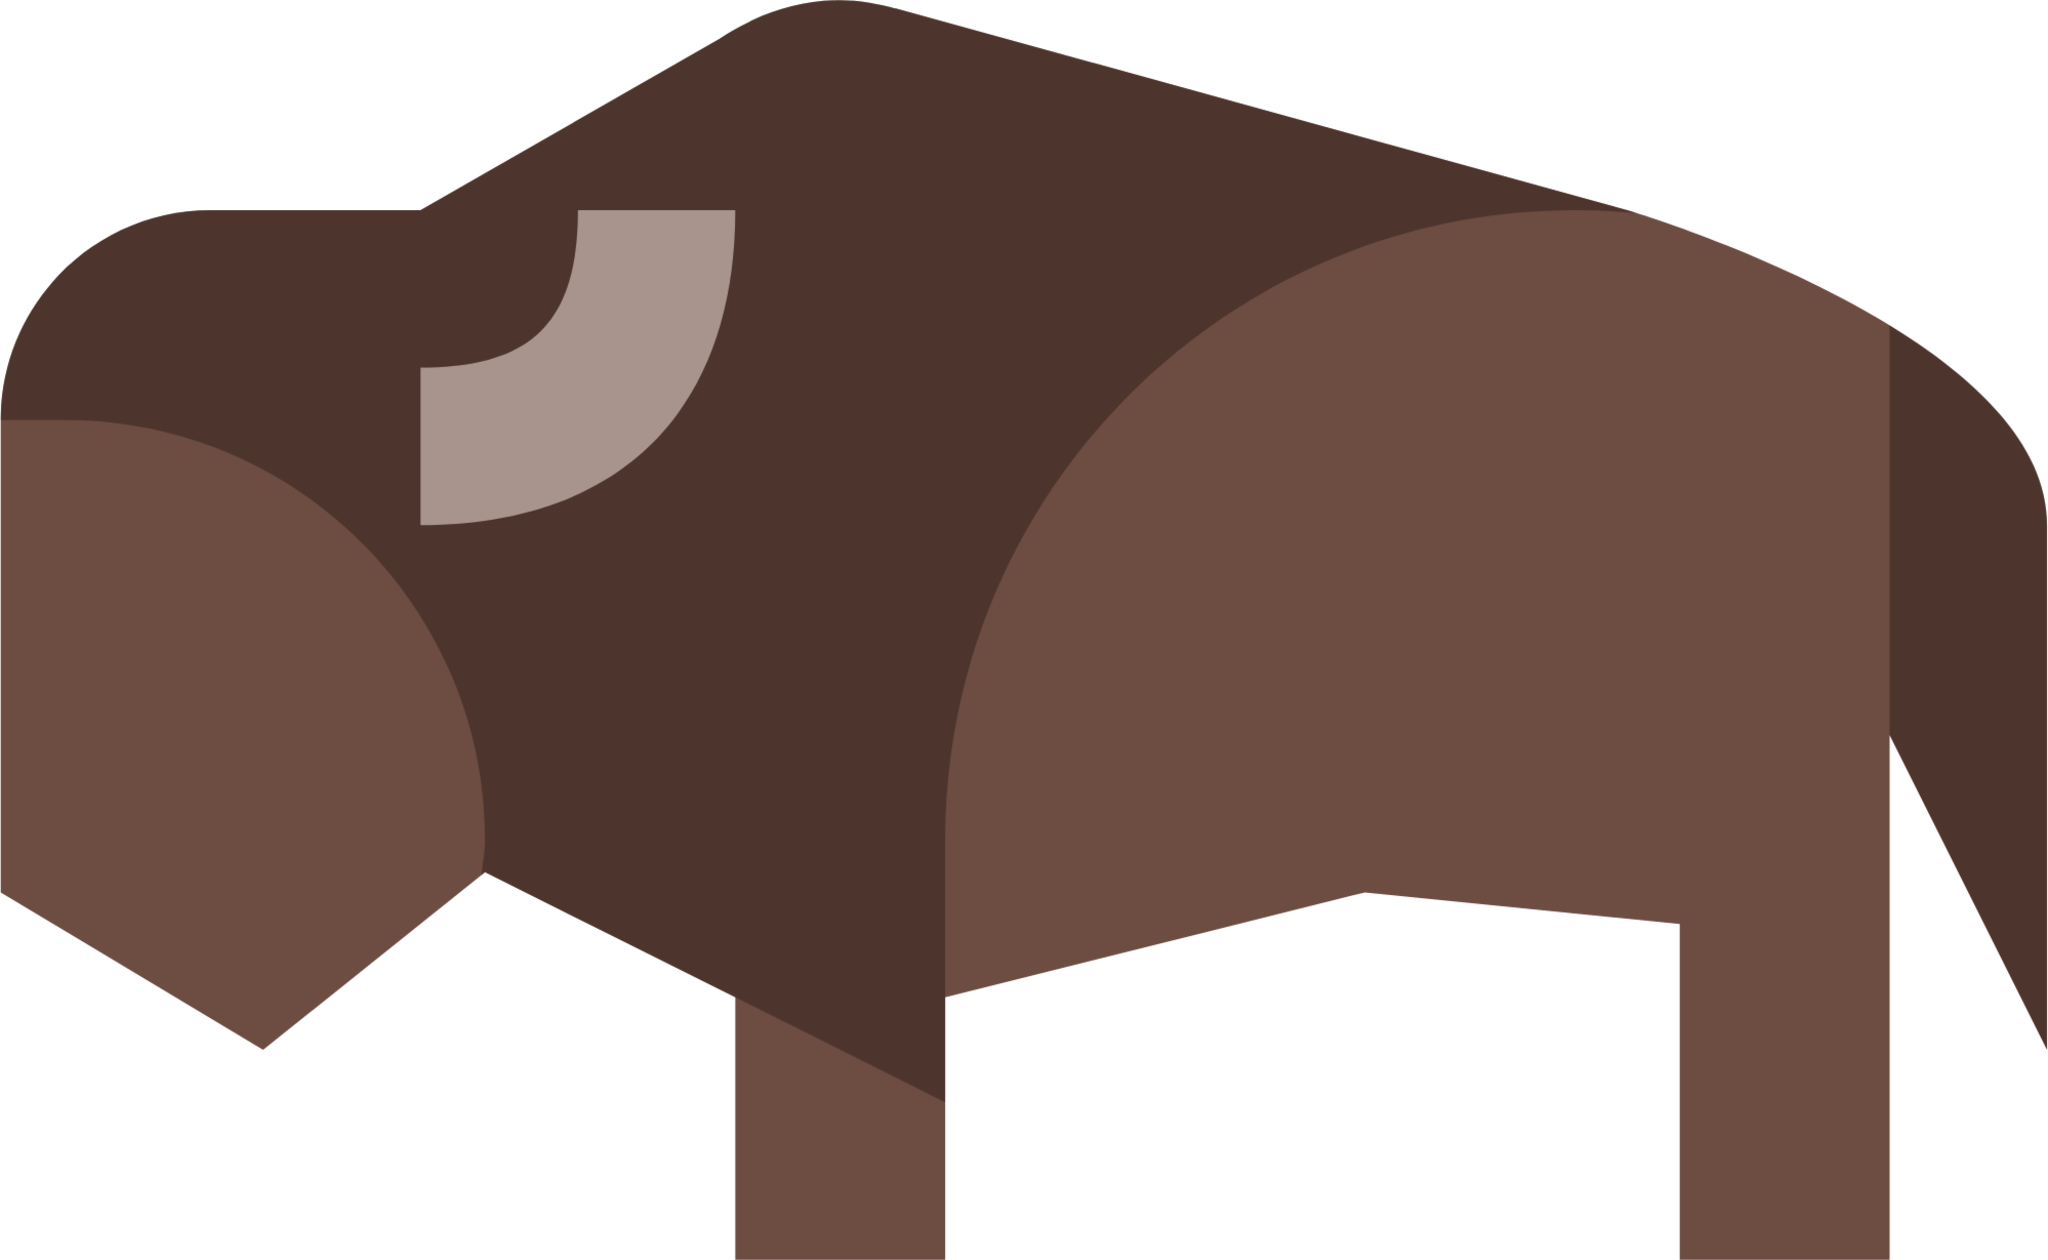 bison icon